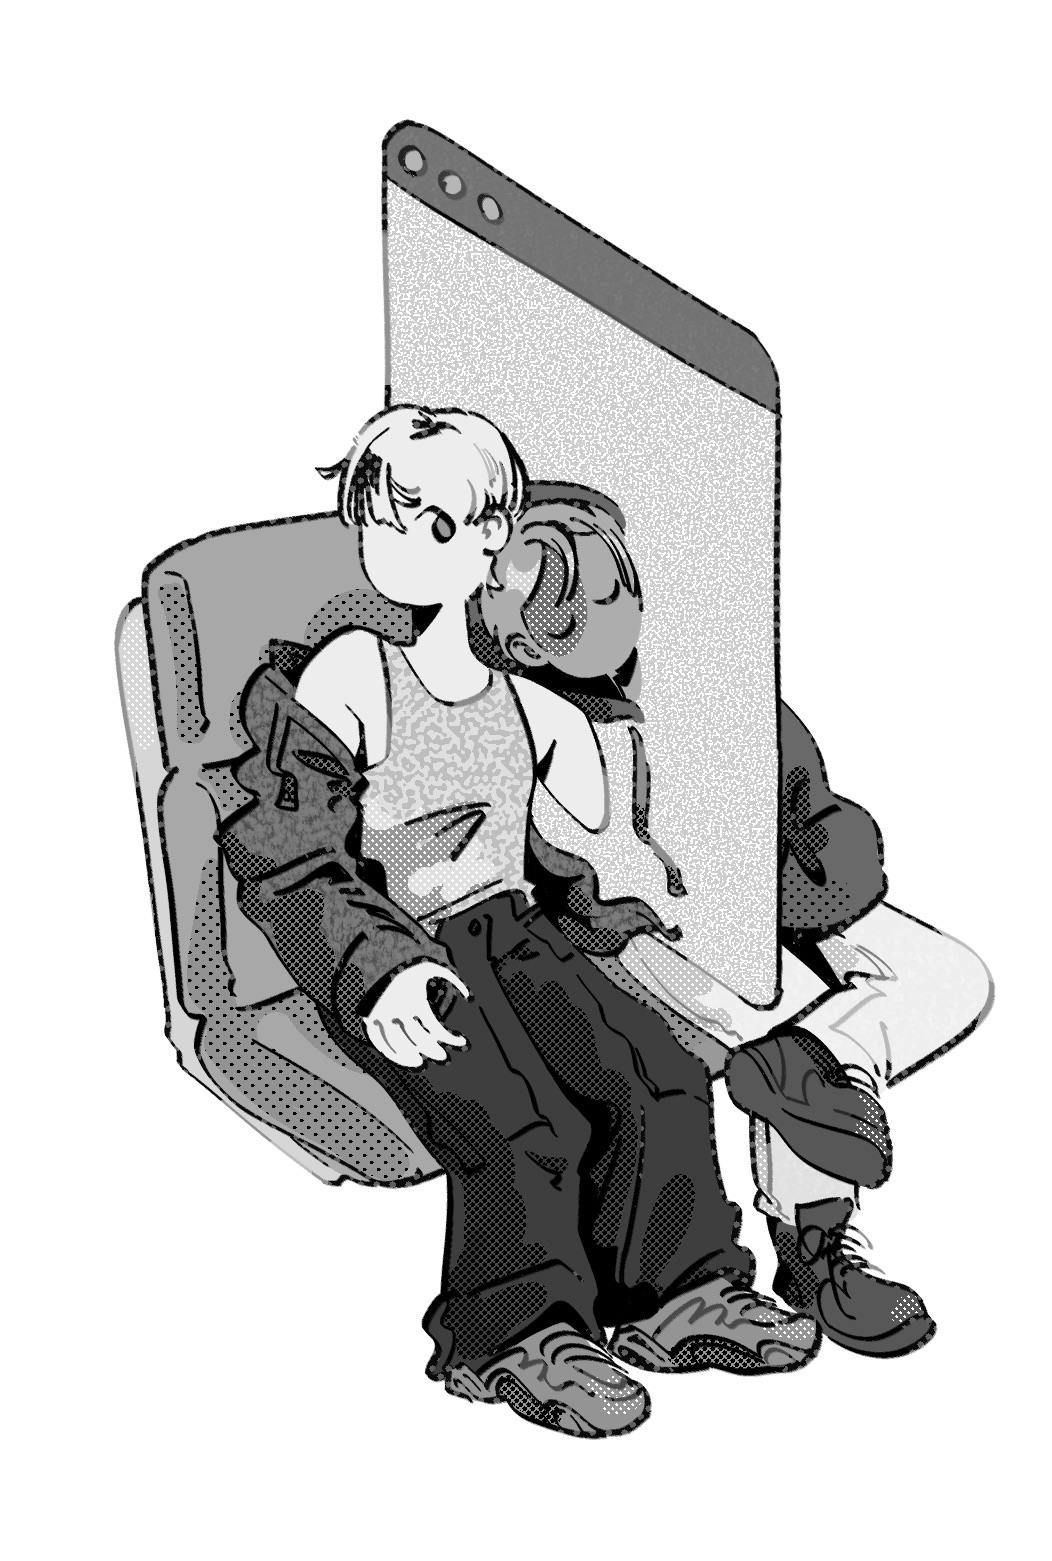 Stylized illustration of two people riding a train, one with their head on the other's shoulder. A screen separates the two.